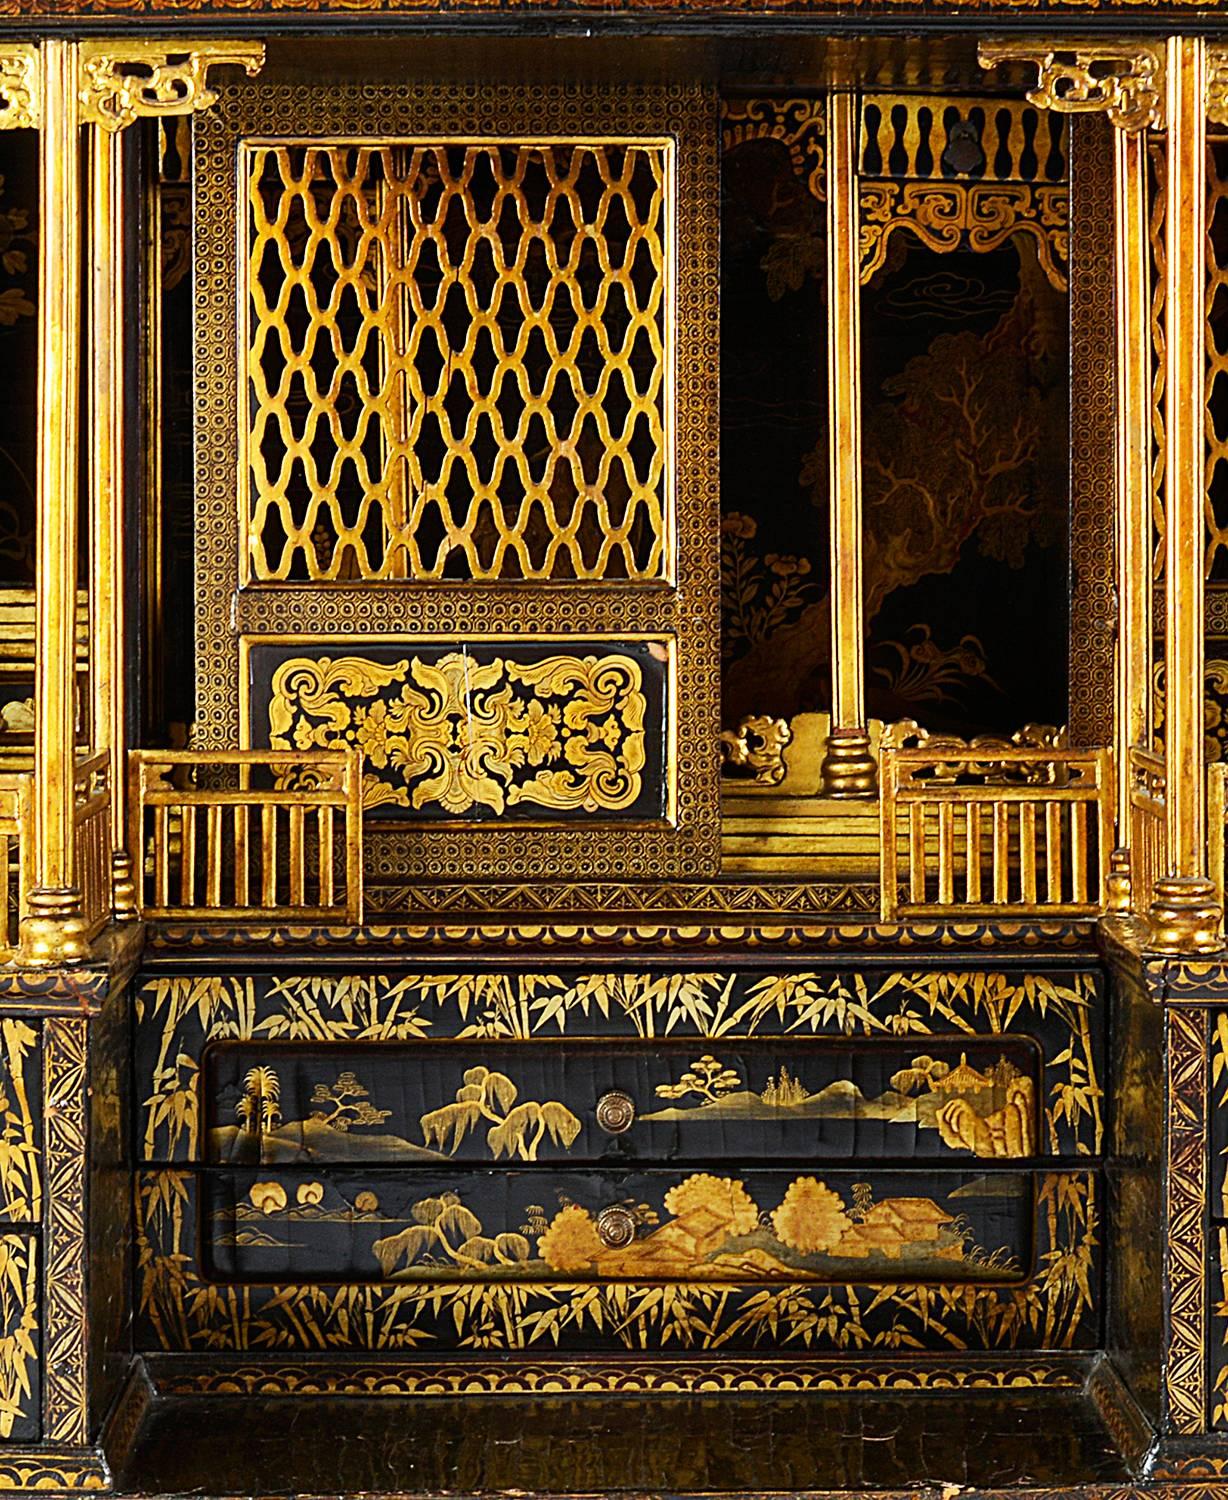 Chinese Export 18th Century Lacquer Cabinet on Stand